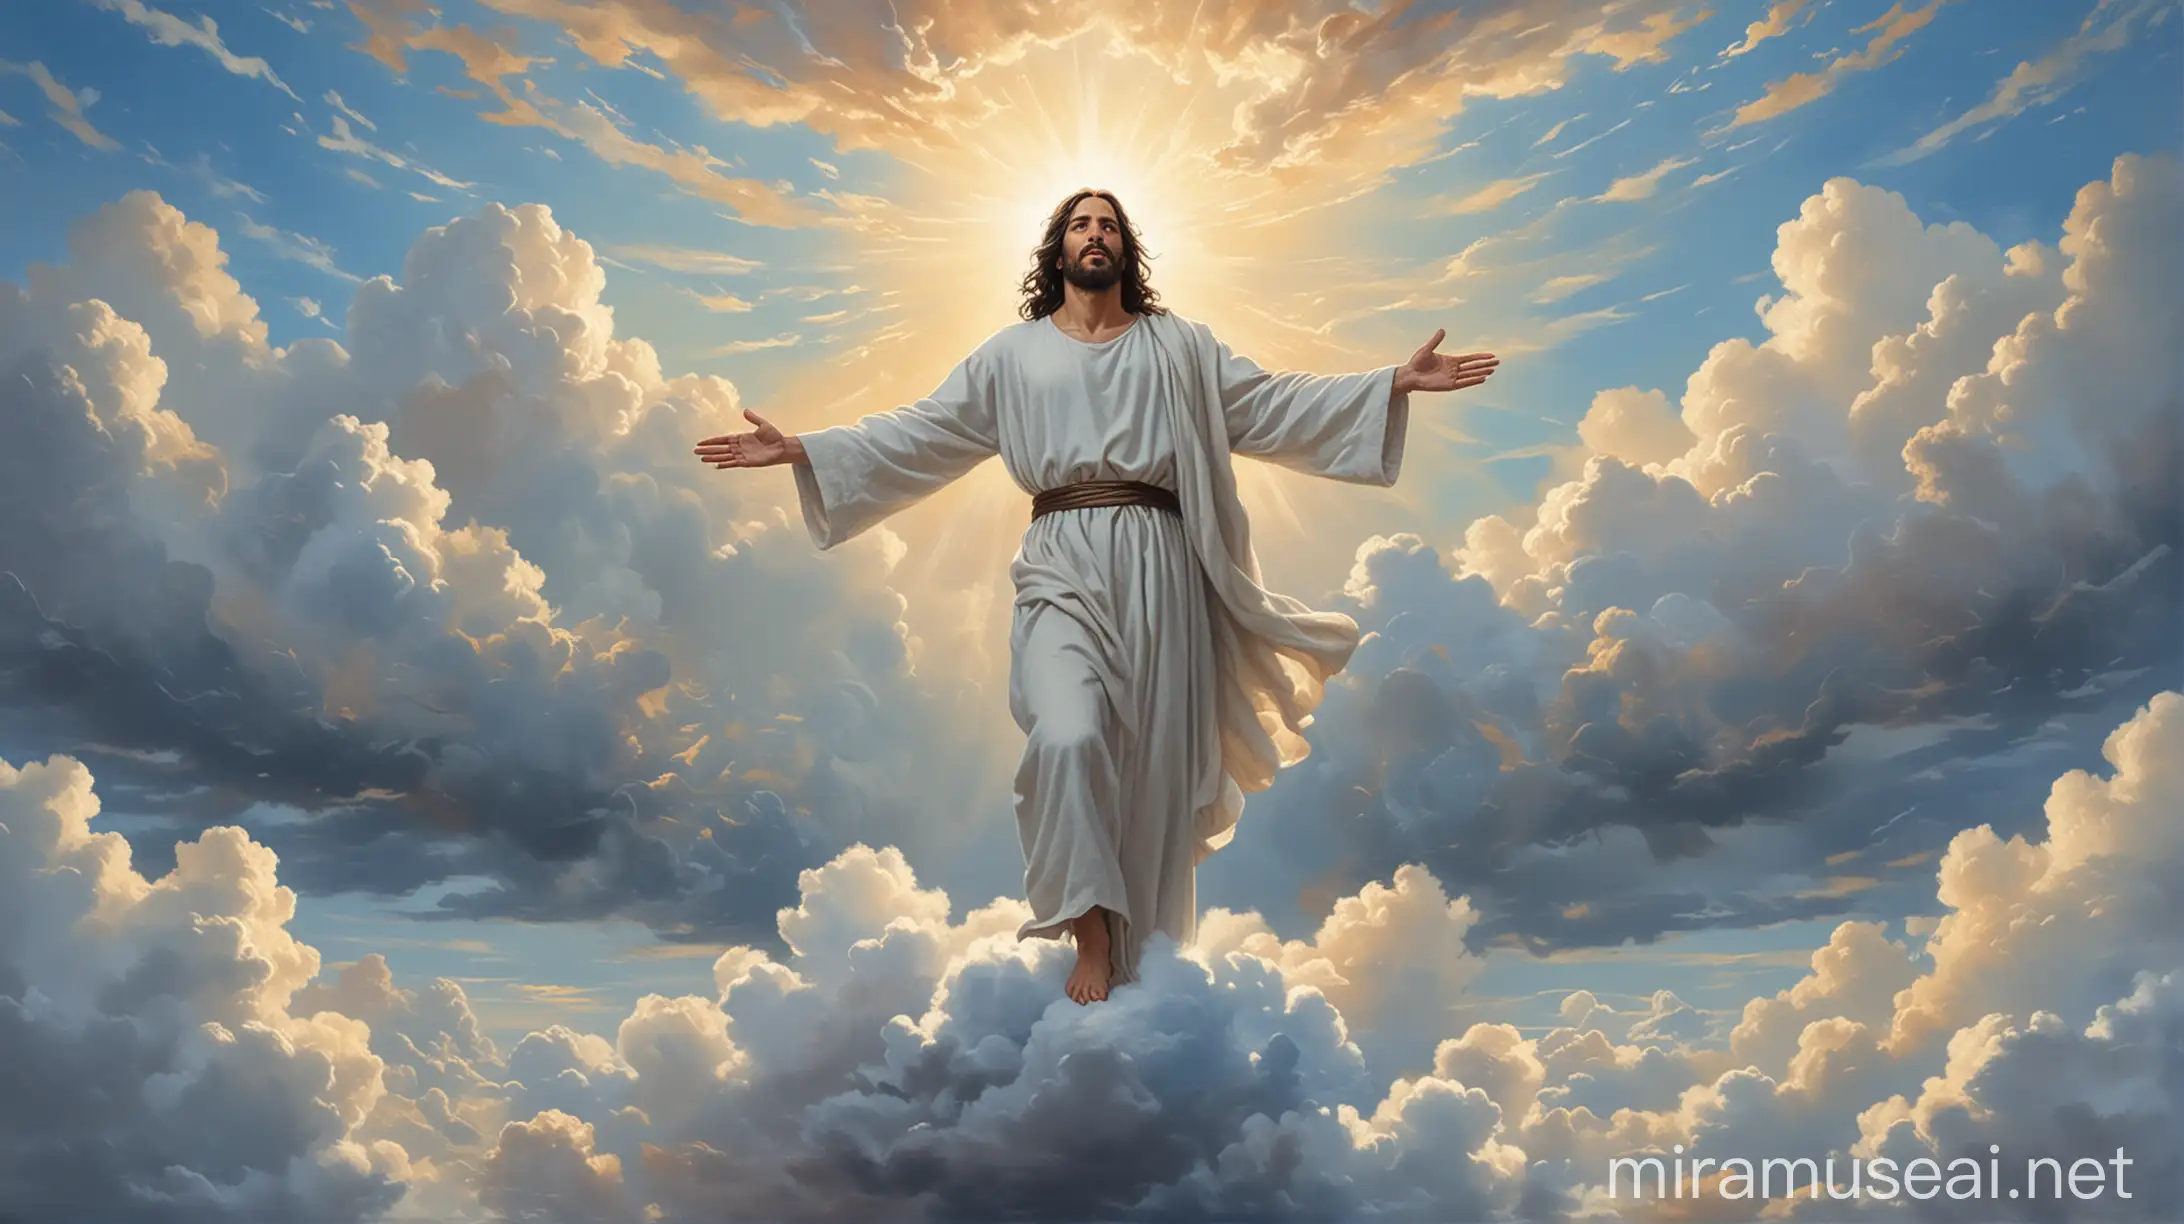 create an oil painting that shows Jesus with black hair looking down kindly, jesus is standing on a cloud and within high clouds with welcoming open arms, light blue sky behind Jesus, Jesus must be 20% the size of the image height